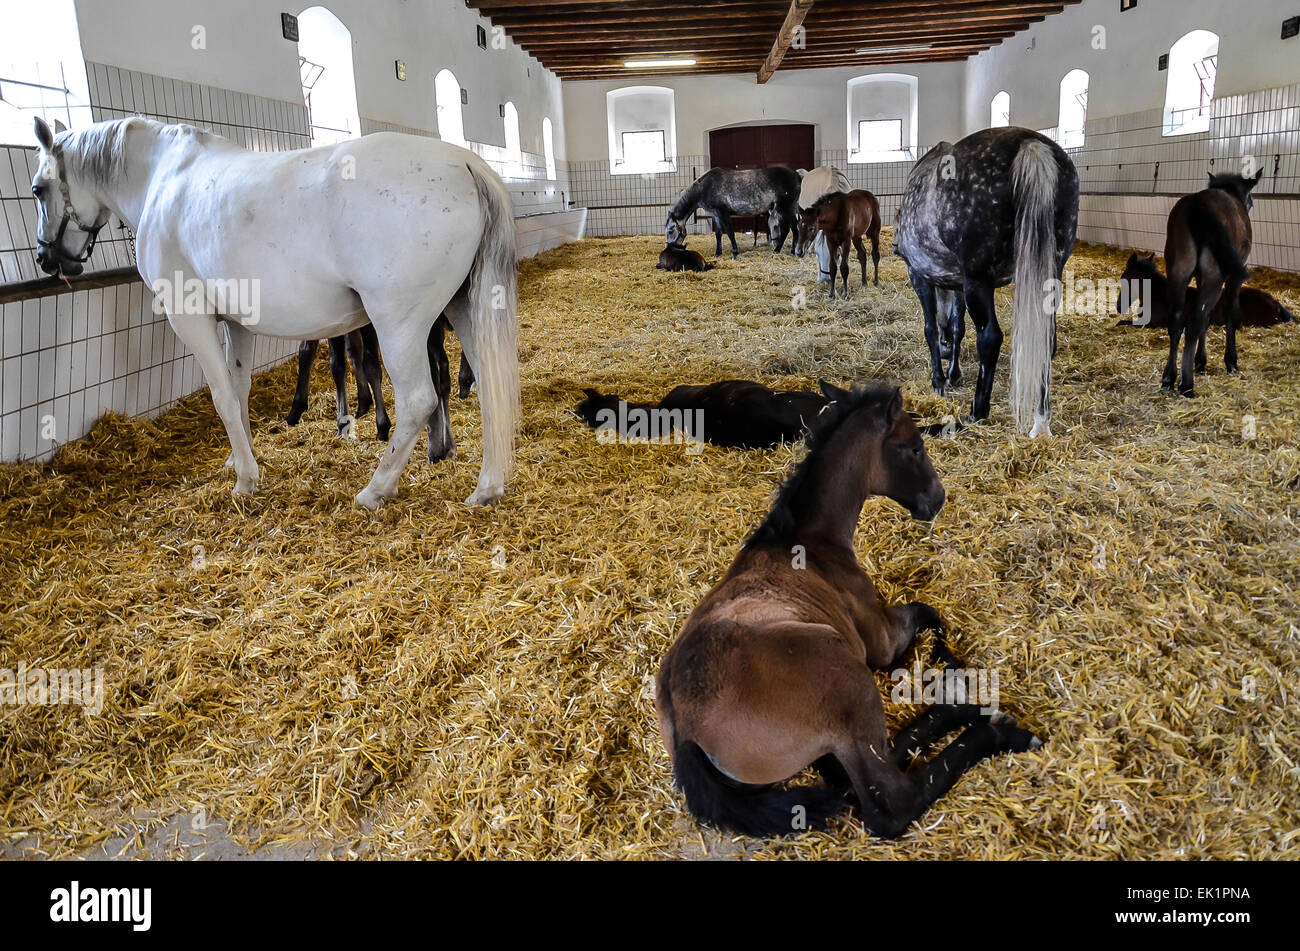 federal stud world famous Lipizzaners  Mares and foals Stock Photo